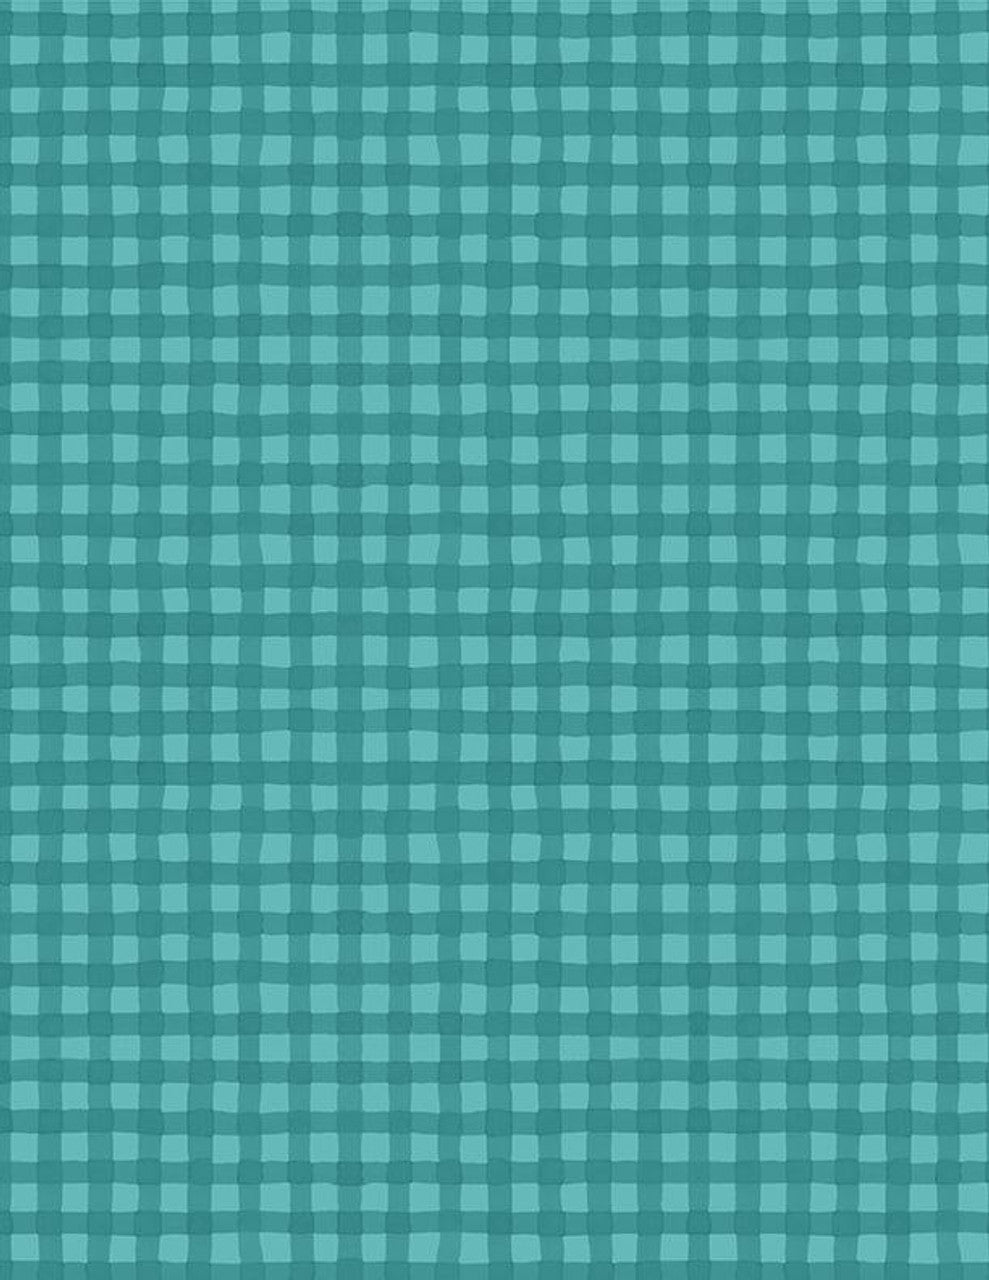 Sunflower Sweet - Gingham Teal - Licence To Quilt